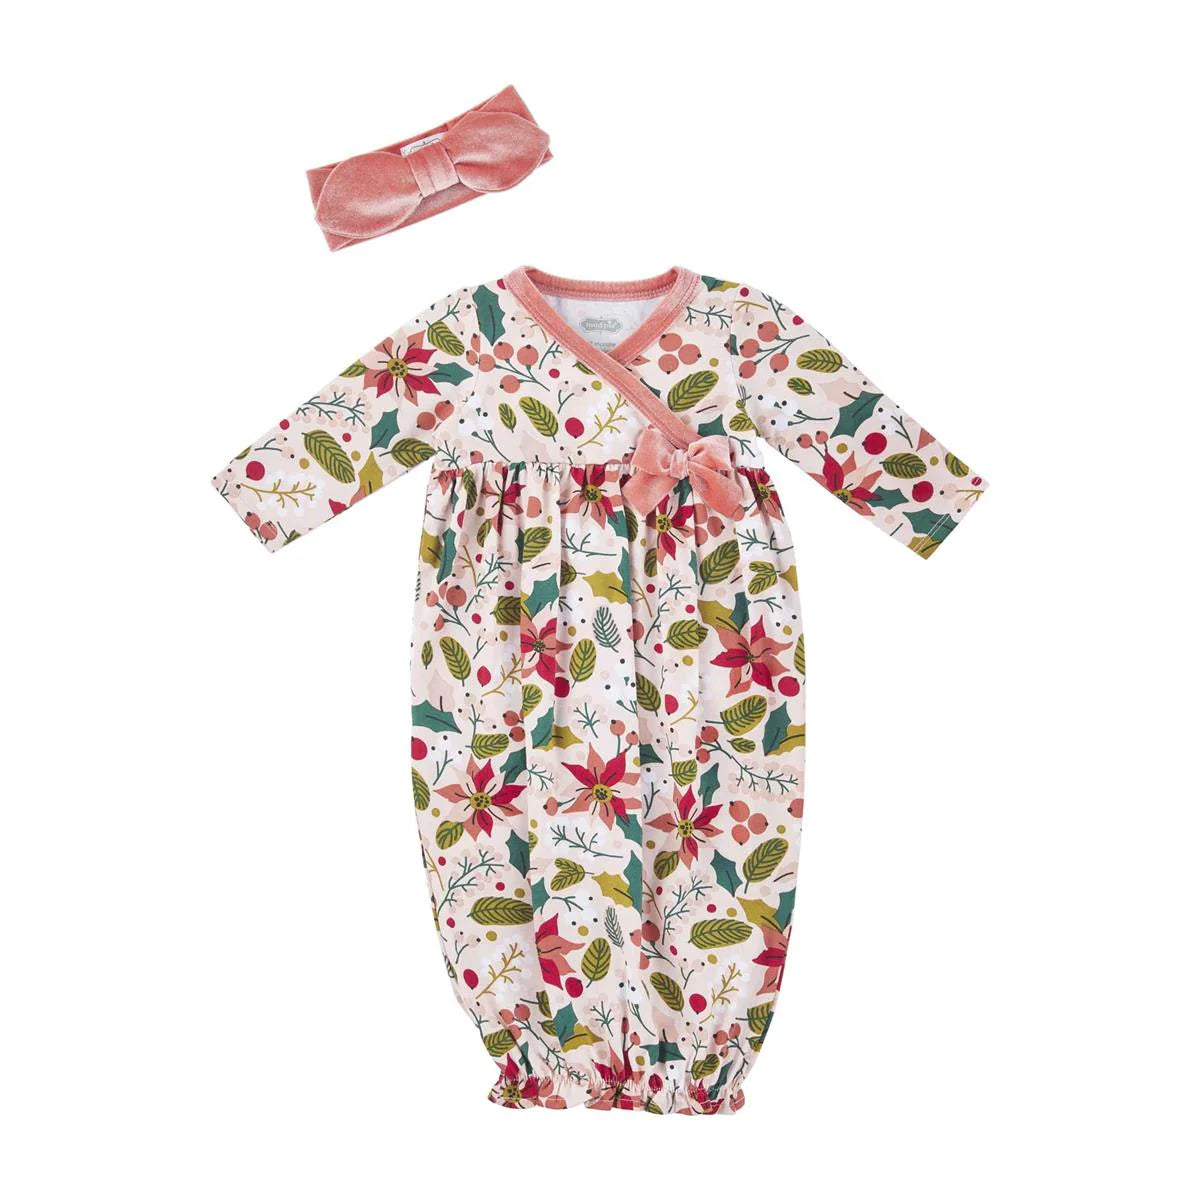 Mud Pie Pink Poinsettia Floral Sleeper Gown Set